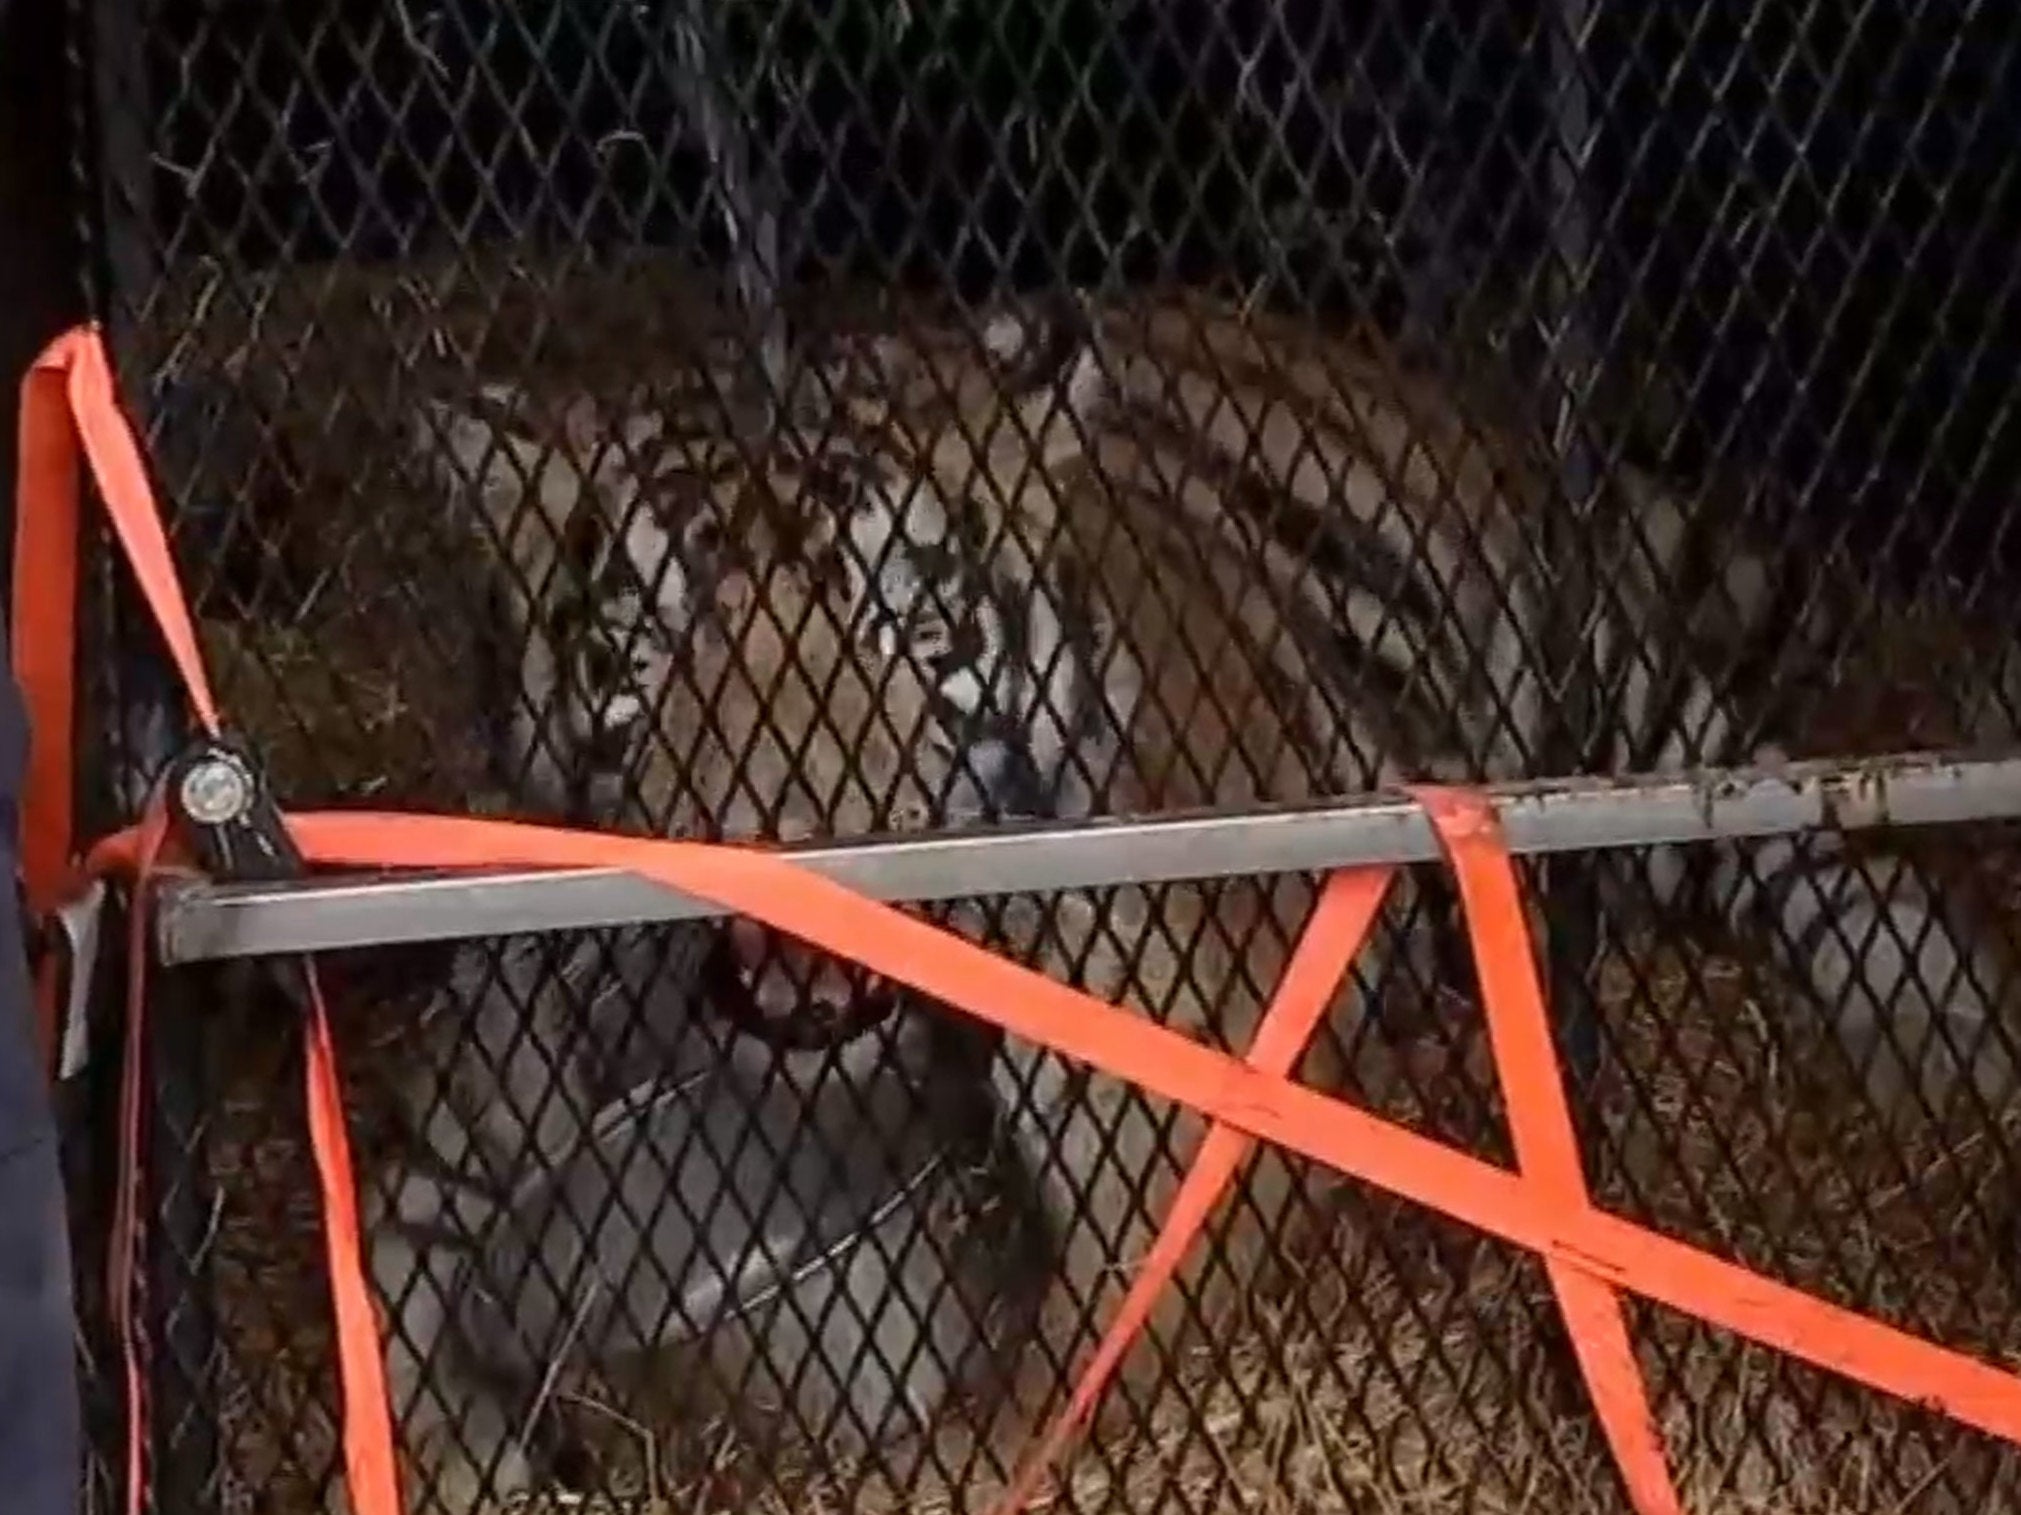 Man goes into abandoned house in Texas to smoke cannabis and finds overweight tiger